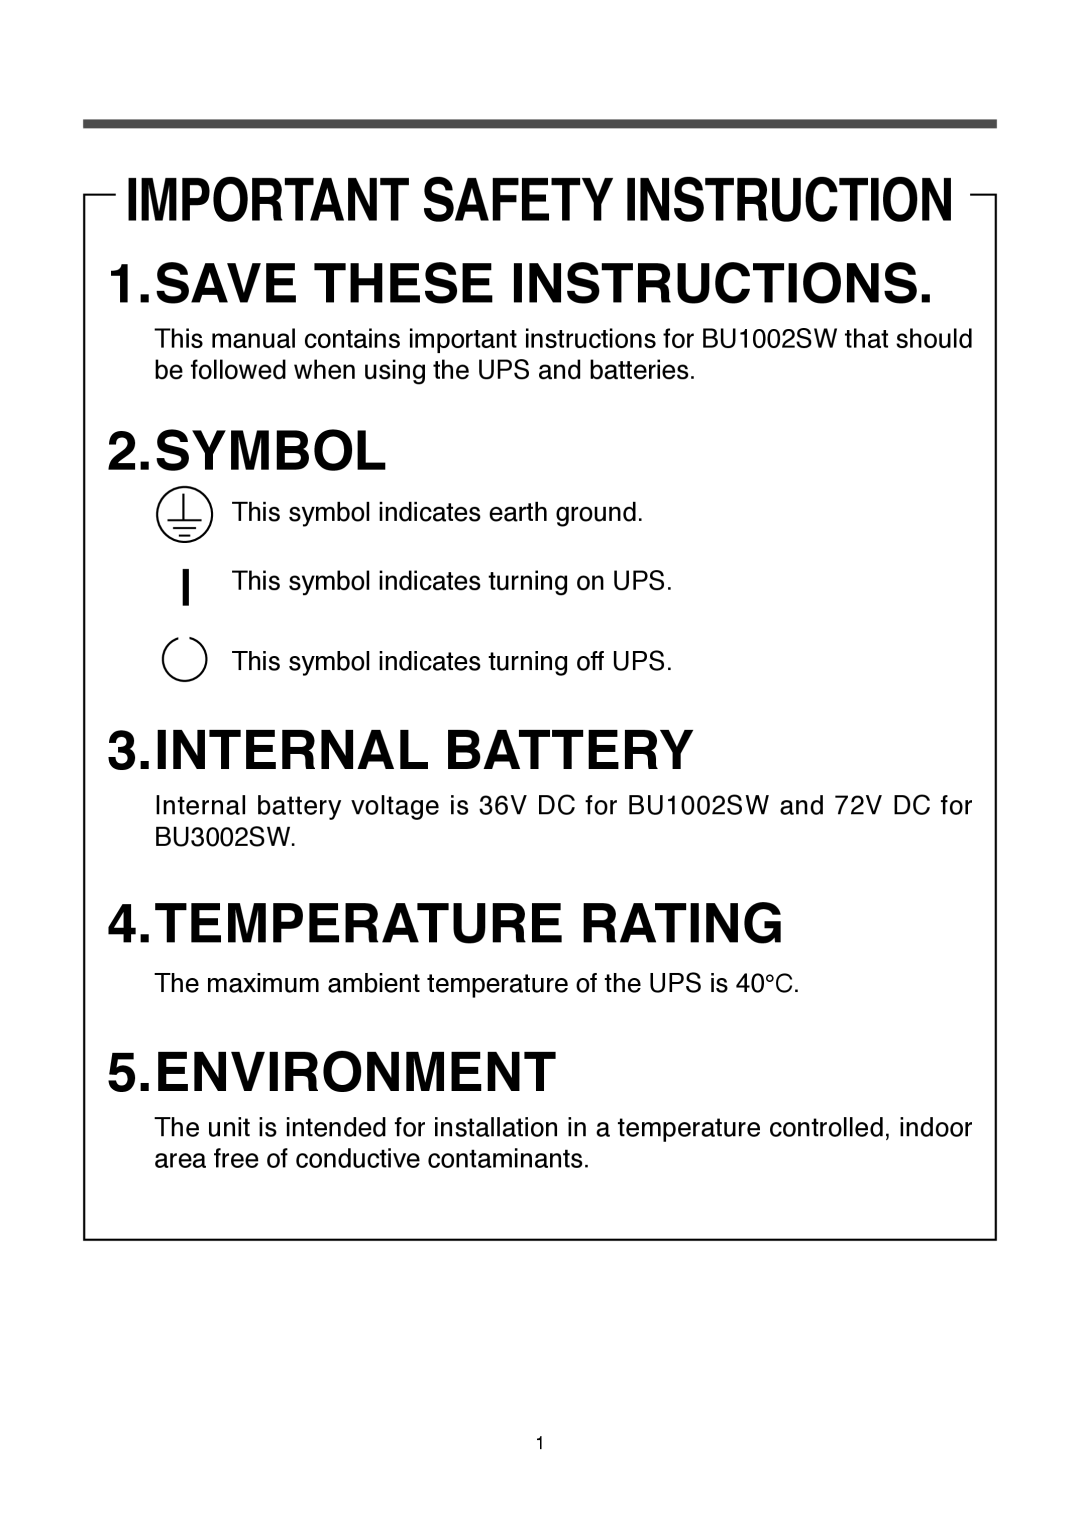 Omron BU1002SW IMPORTANT SAFETY INSTRUCTION 1.SAVE THESE INSTRUCTIONS, Symbol, Internal Battery, Temperature Rating 